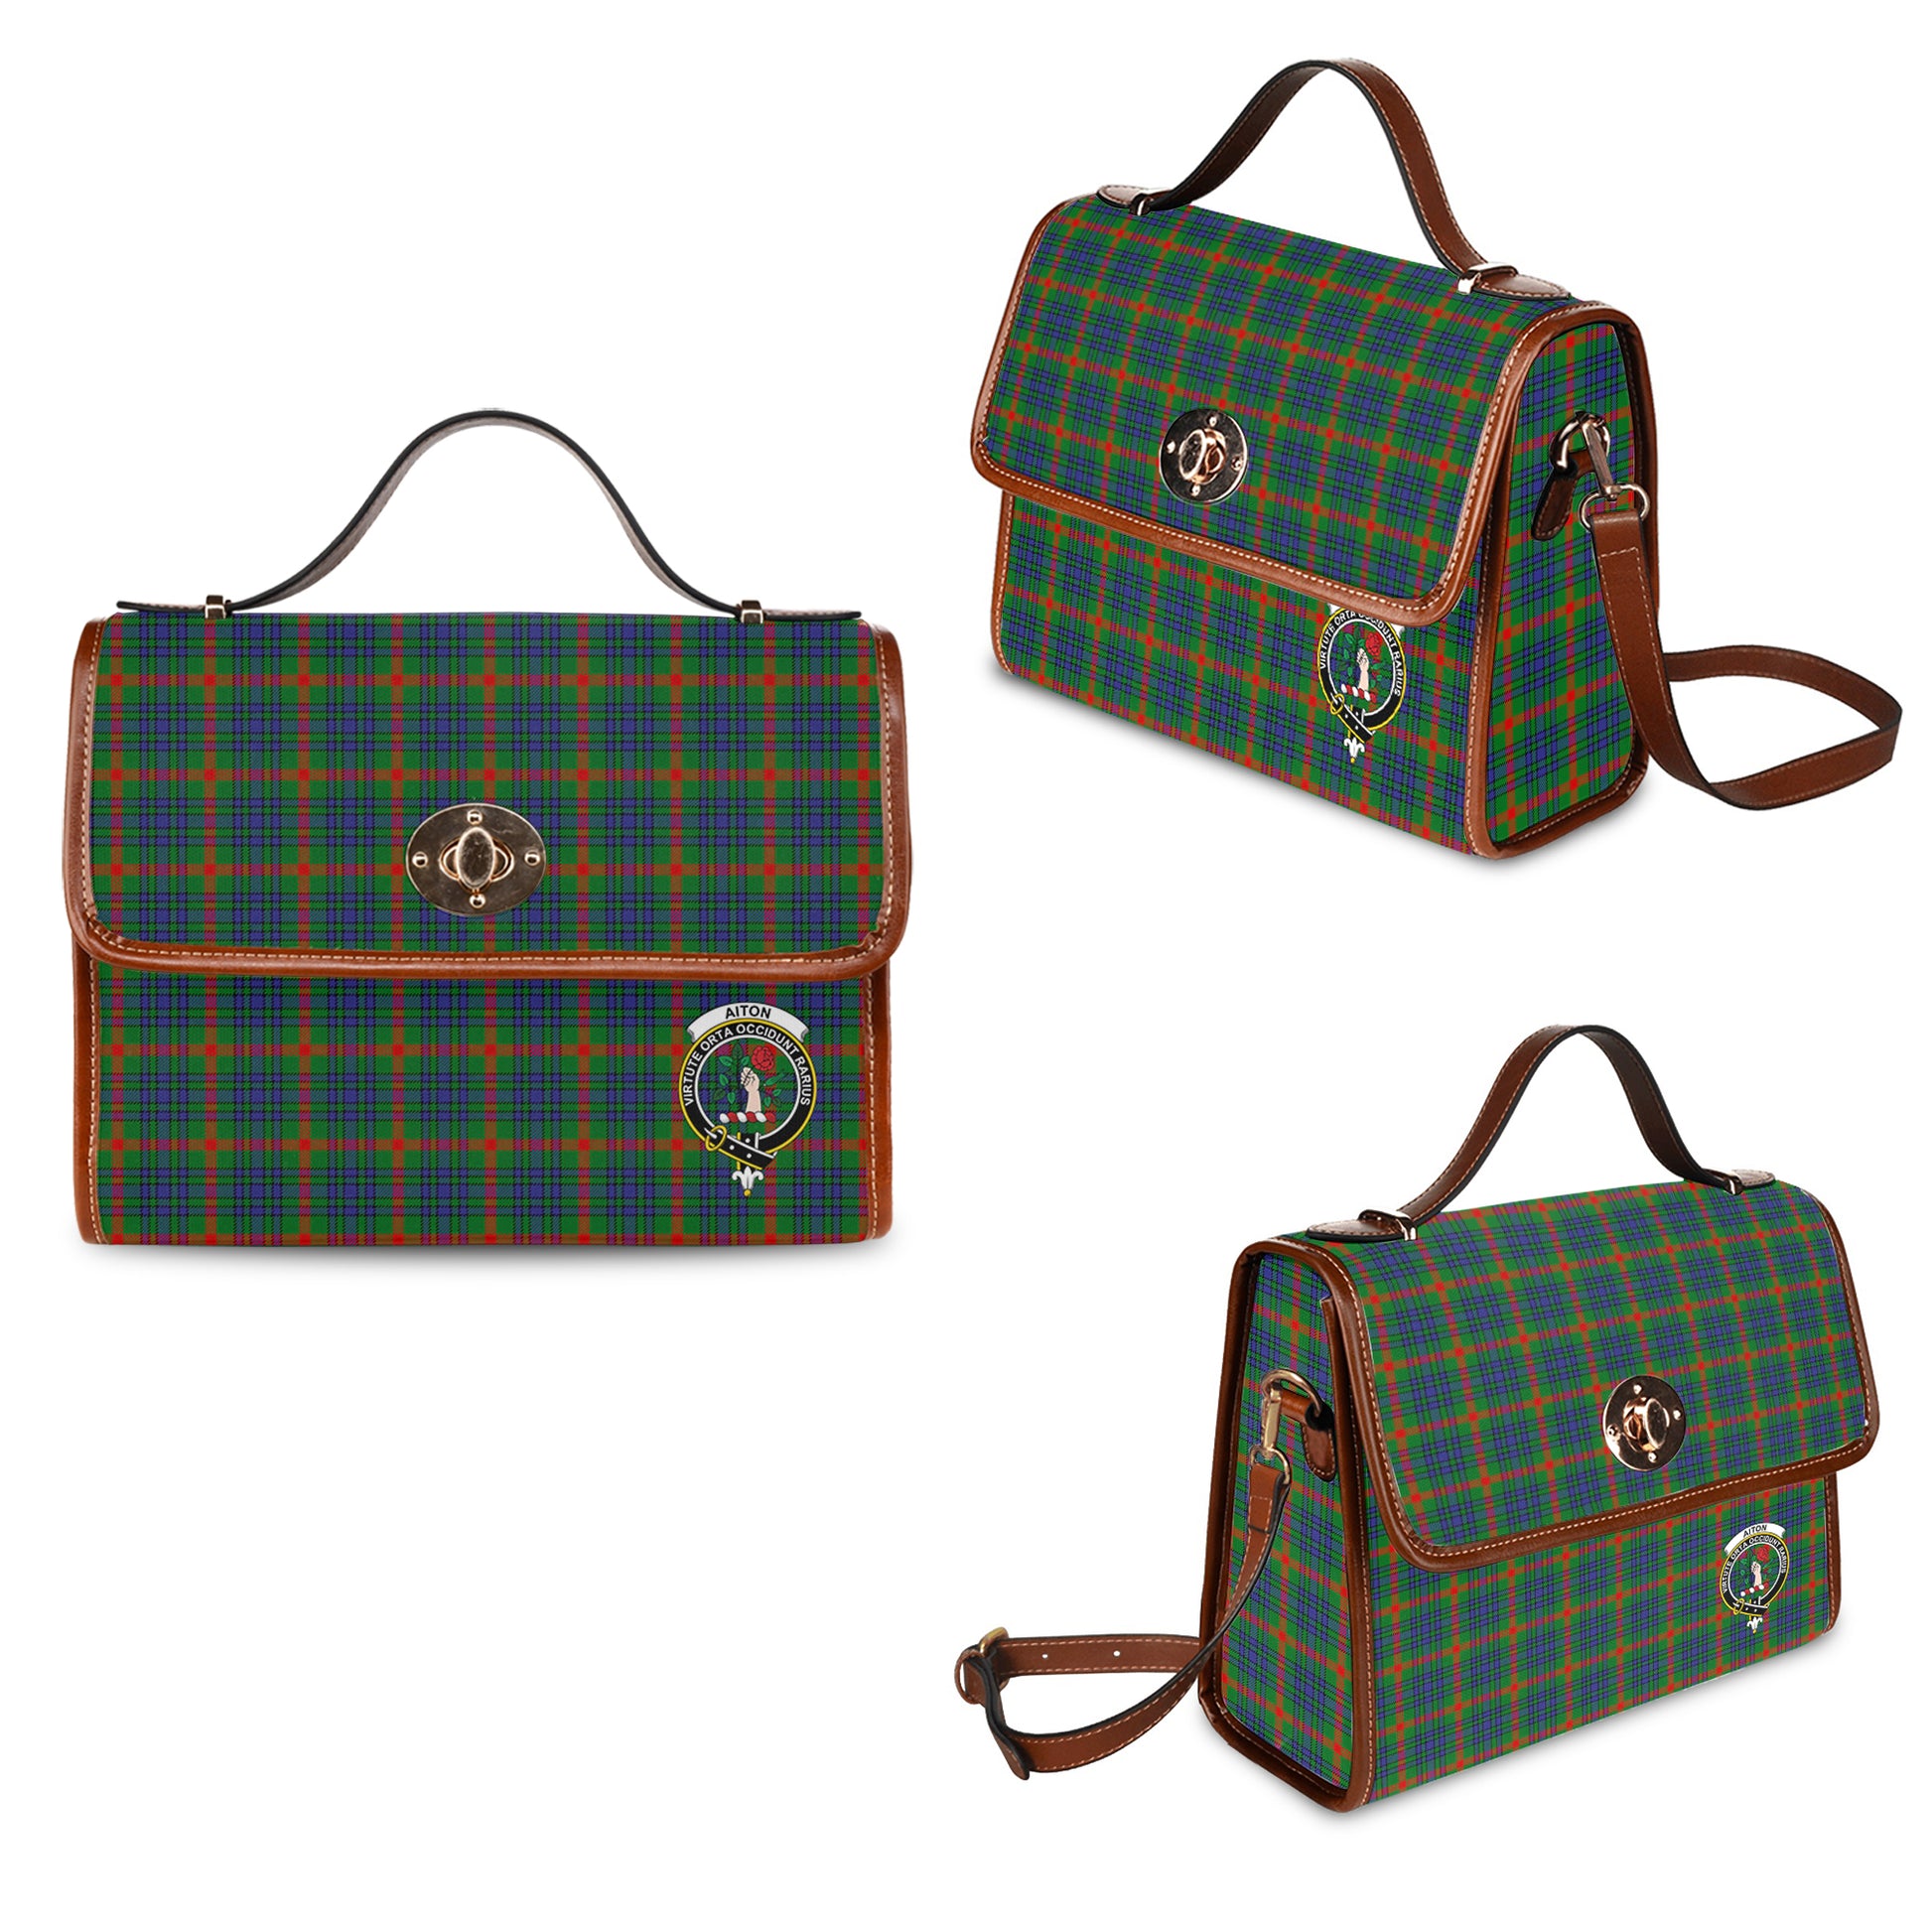 Aiton Tartan Leather Strap Waterproof Canvas Bag with Family Crest One Size 34cm * 42cm (13.4" x 16.5") - Tartanvibesclothing